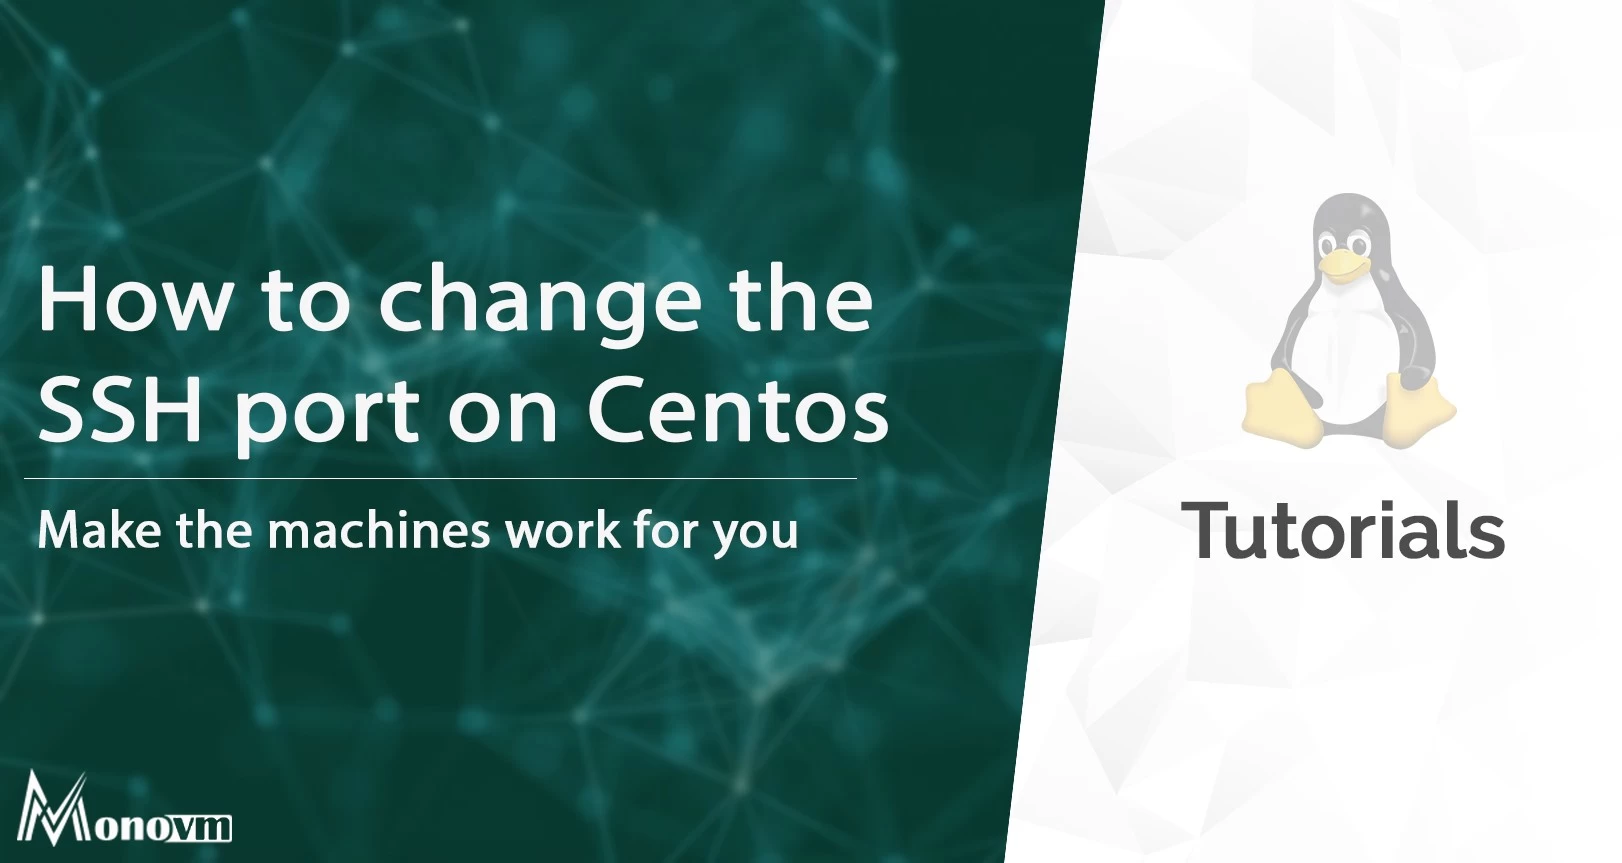 How to change SSH port on Centos 6, 7, and 8.